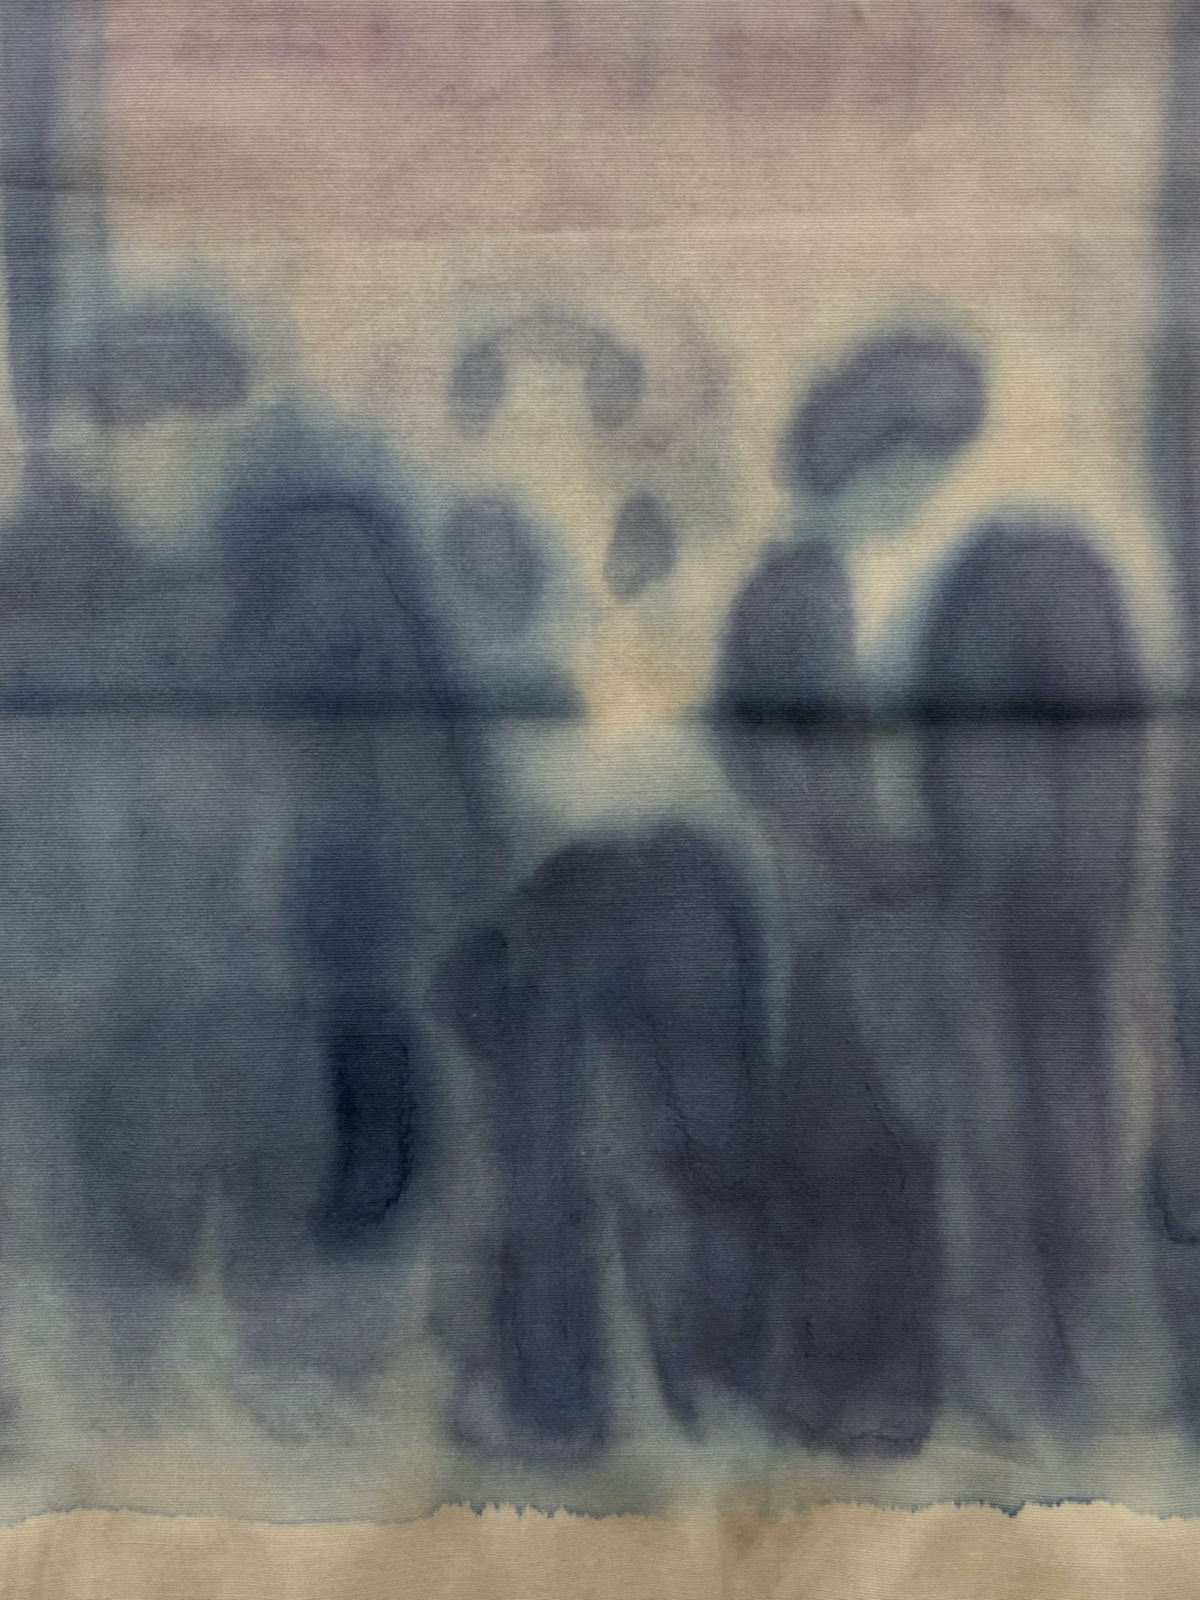 Three (detail). From In My Locked Room series, 2020. Blurred images show the unreliability of boundaries between the past and the present, as well as of the memory